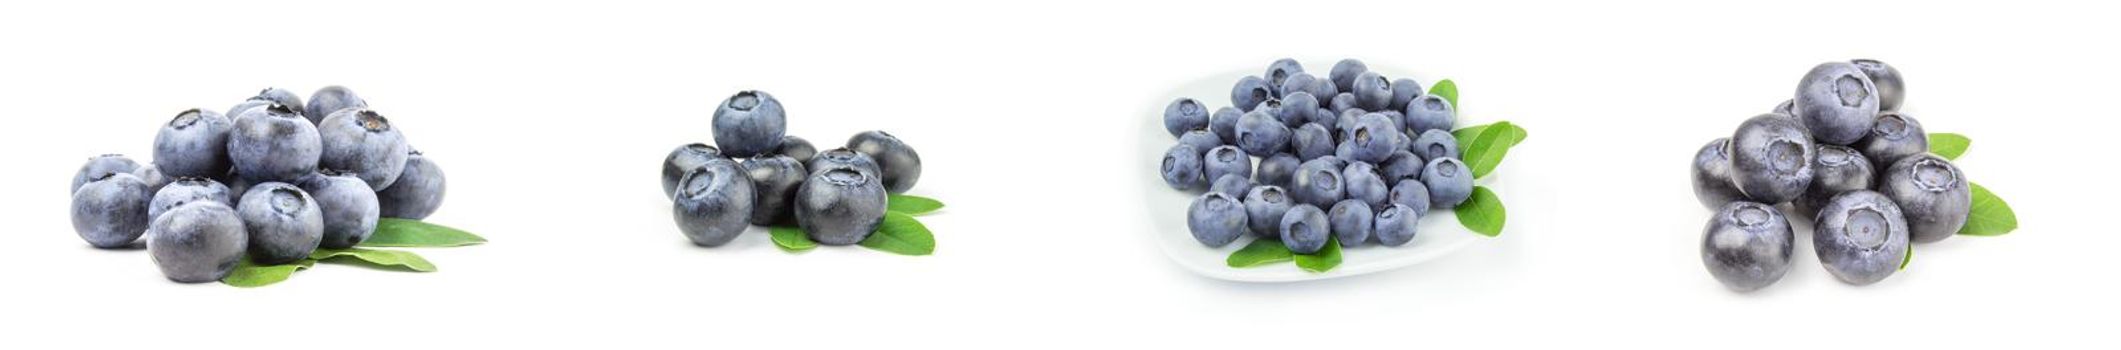 Collection of greatbilberry on a white background